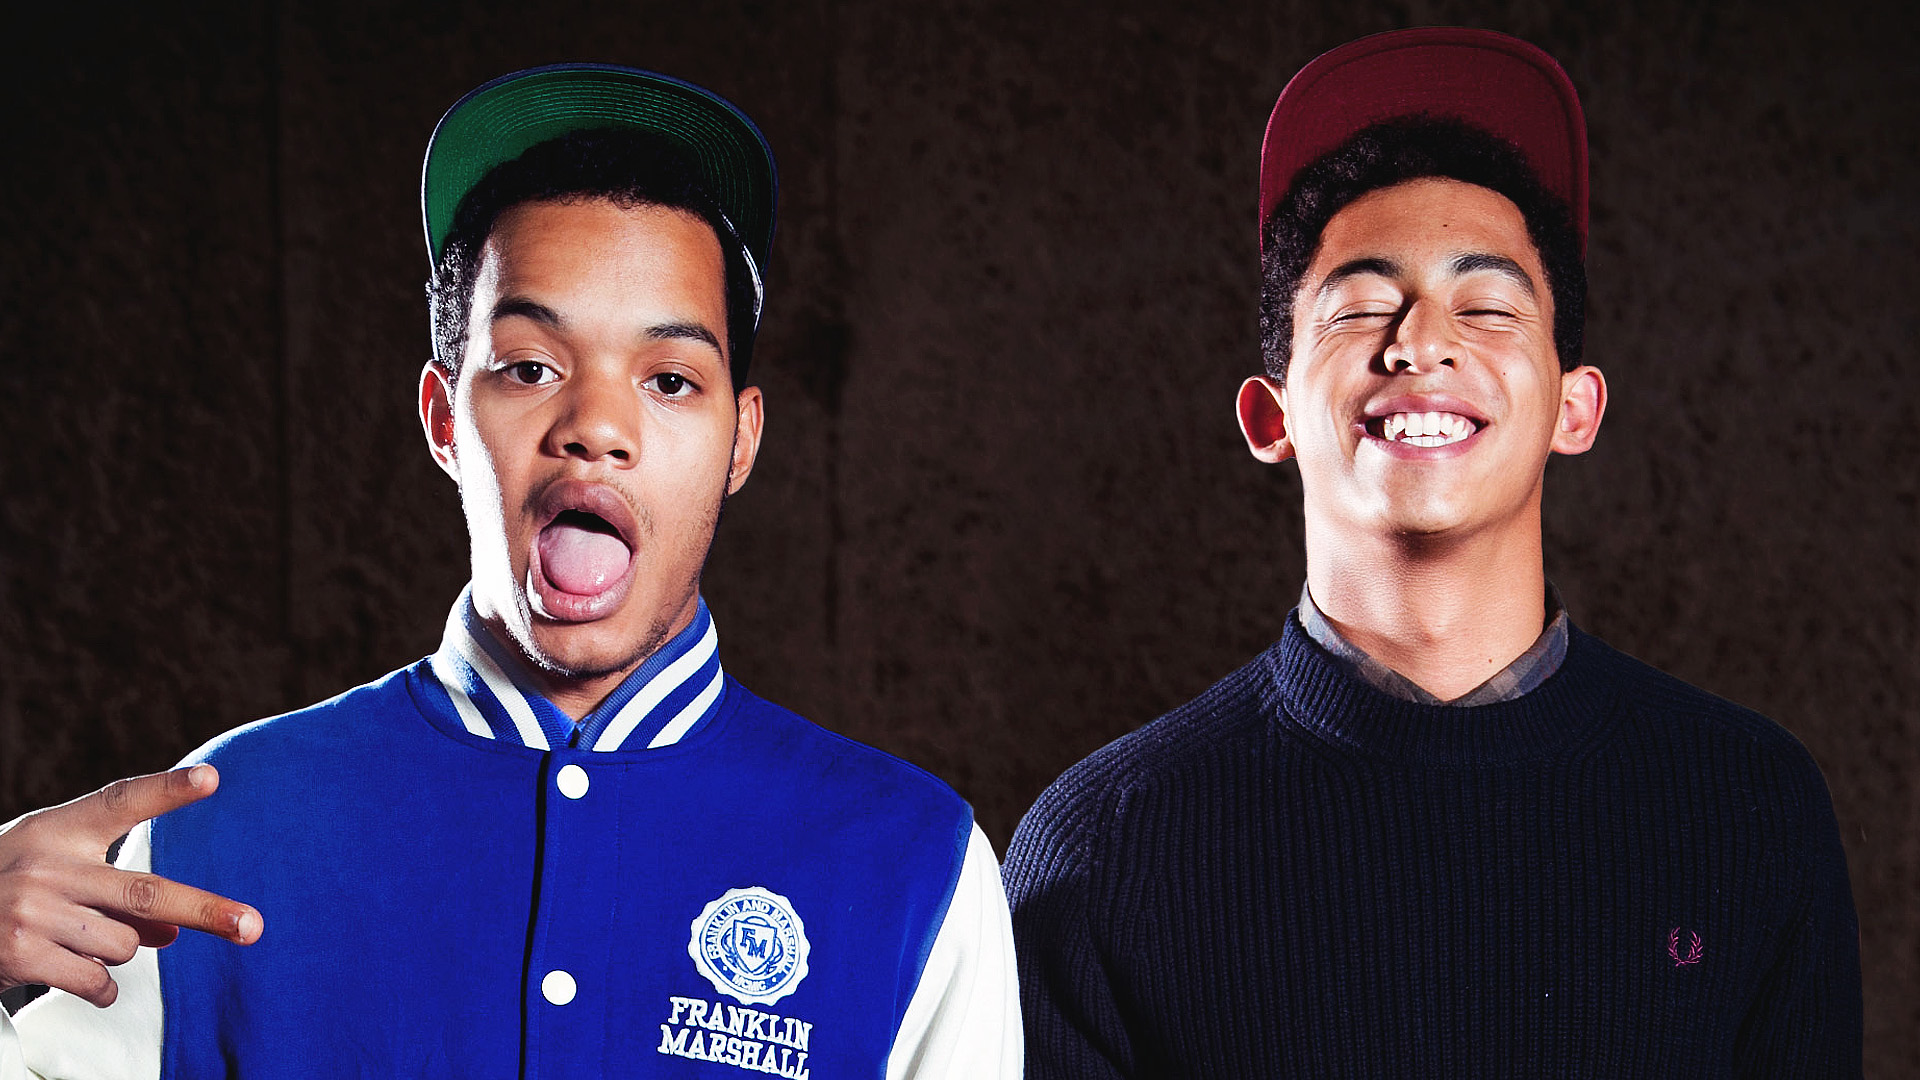 Down With The Trumpets av Rizzle Kicks